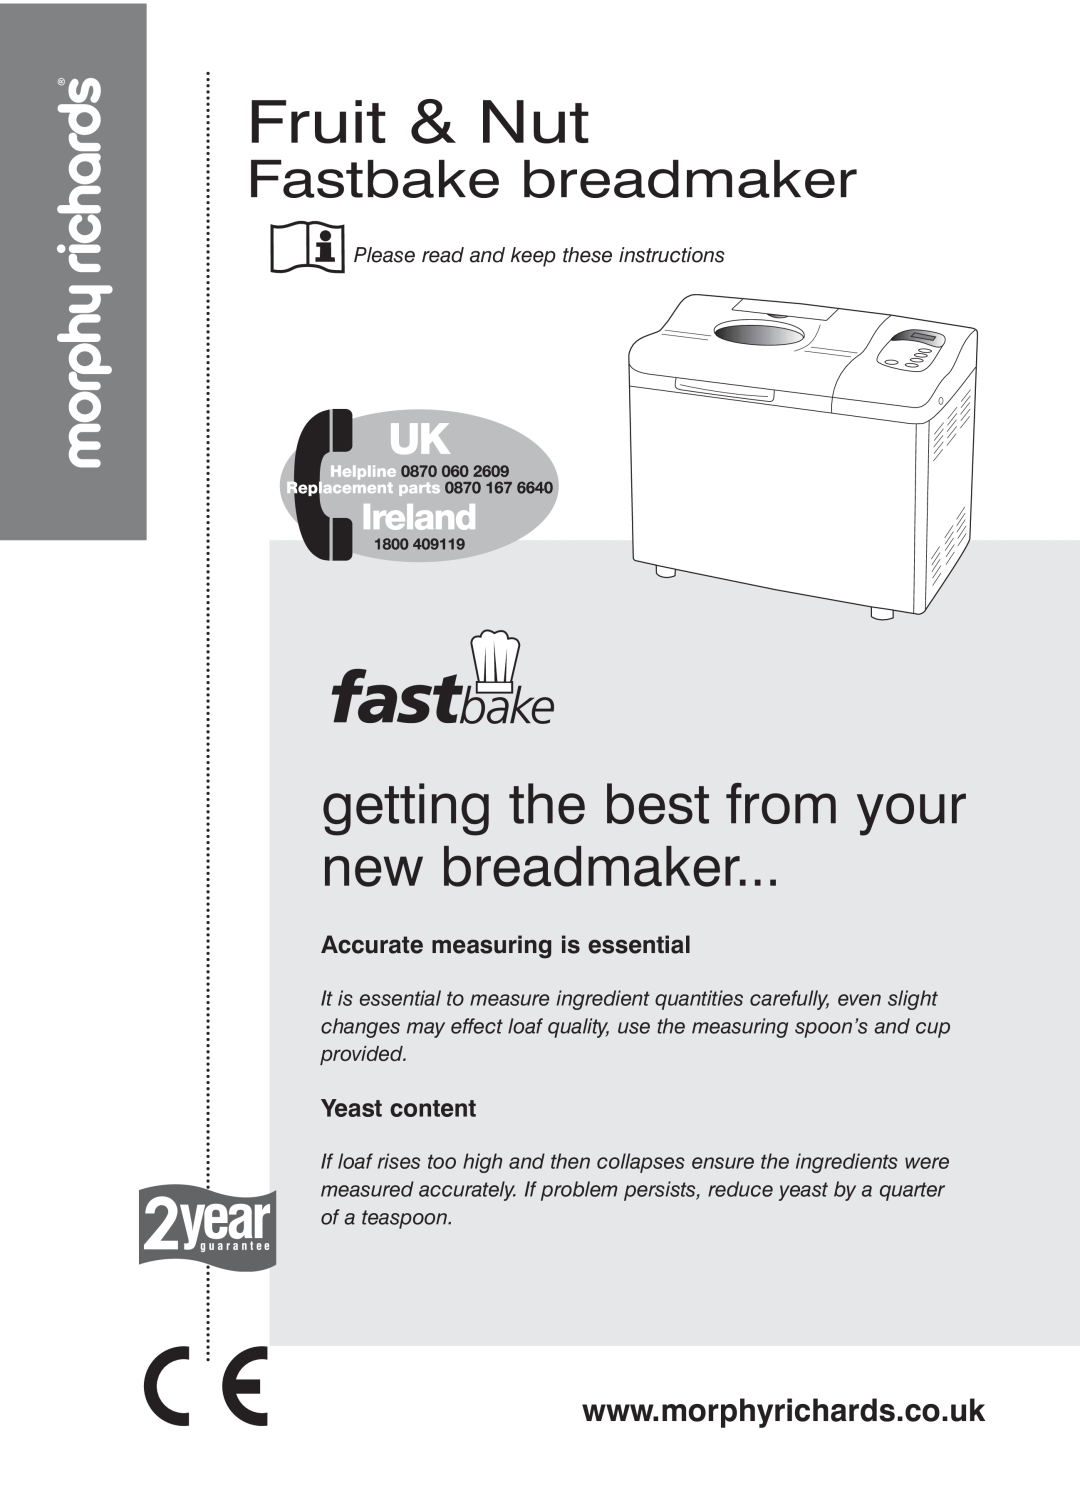 Morphy Richards manual Accurate measuring is essential, Yeast content, Fruit & Nut, Fastbake breadmaker 